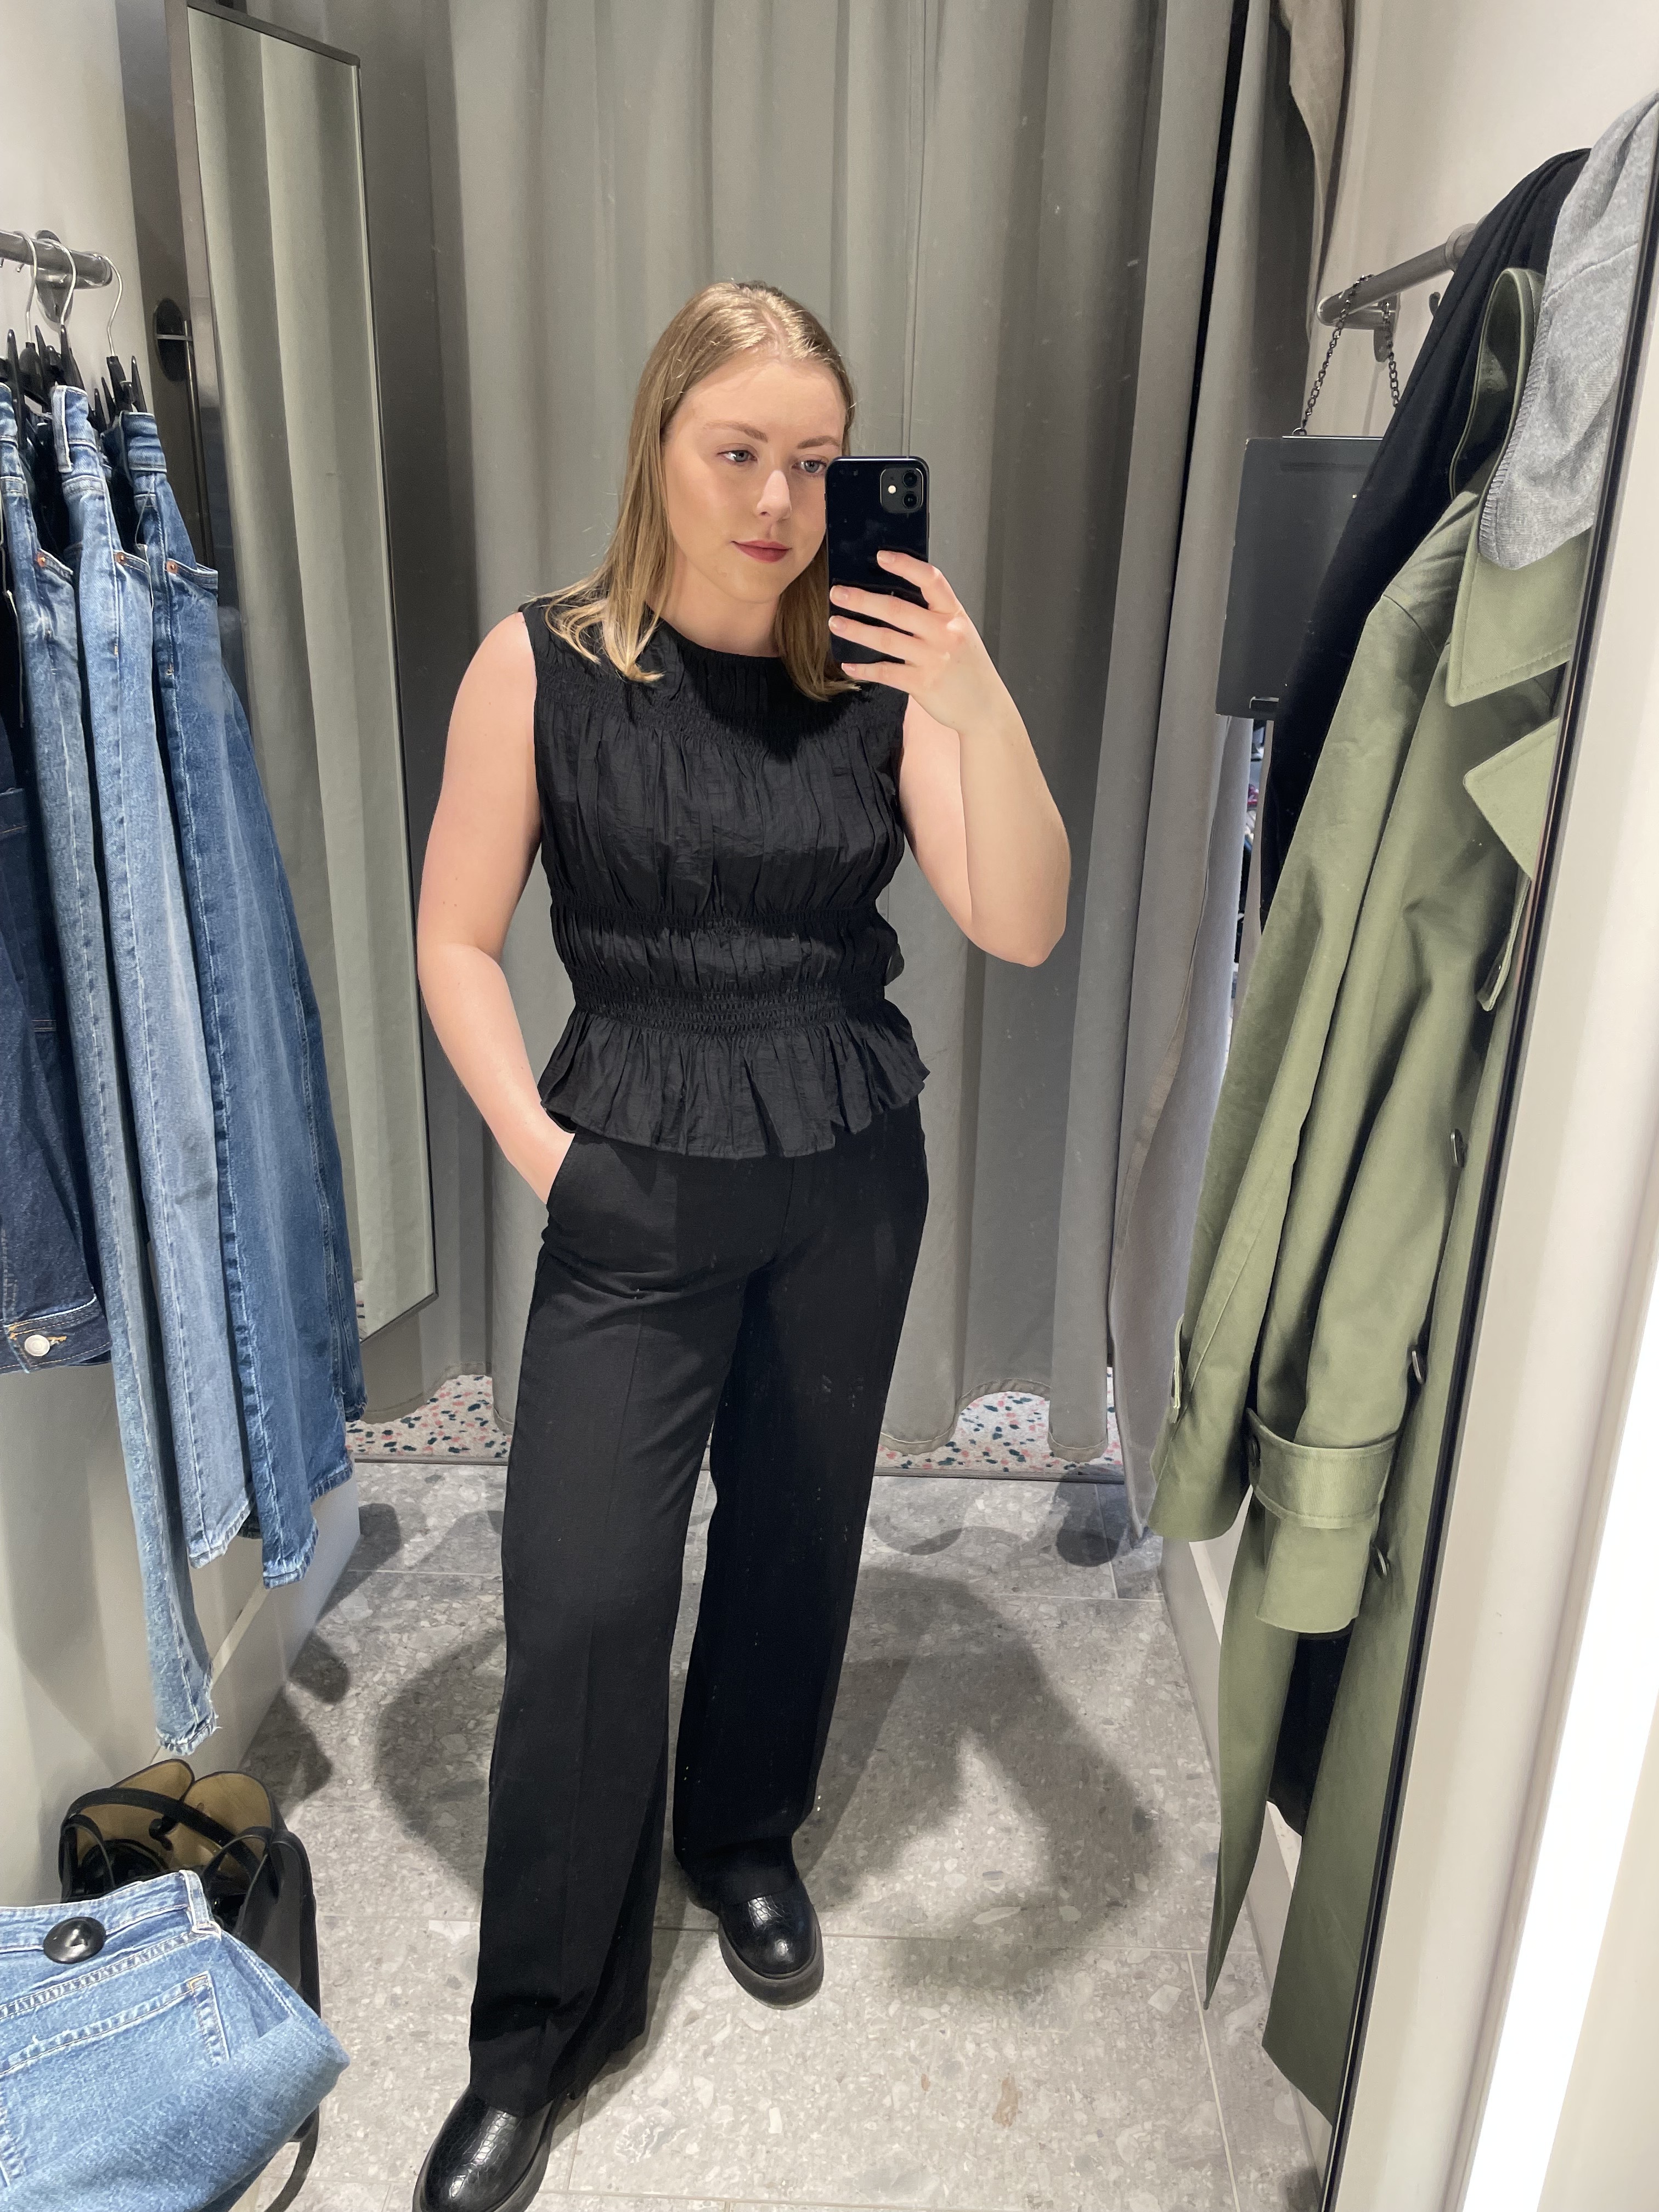 Woman in dressing room wears black top black linen trousers and boots